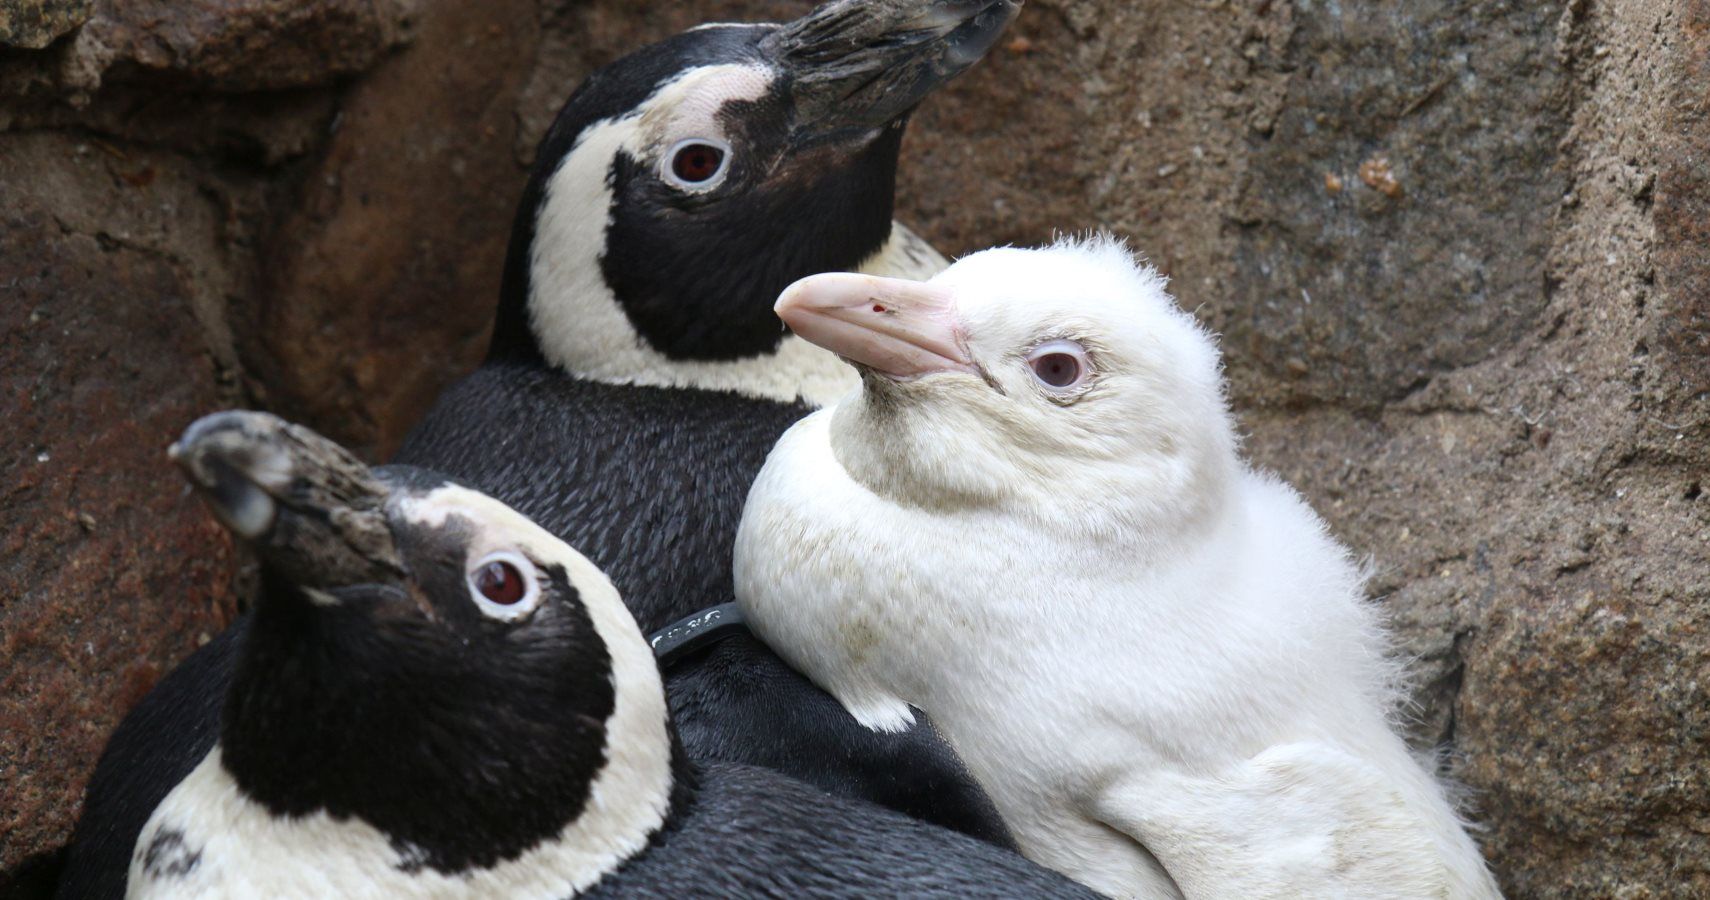 Albino Penguin Born In Poland Is Extremely Rare And Extremely Cute